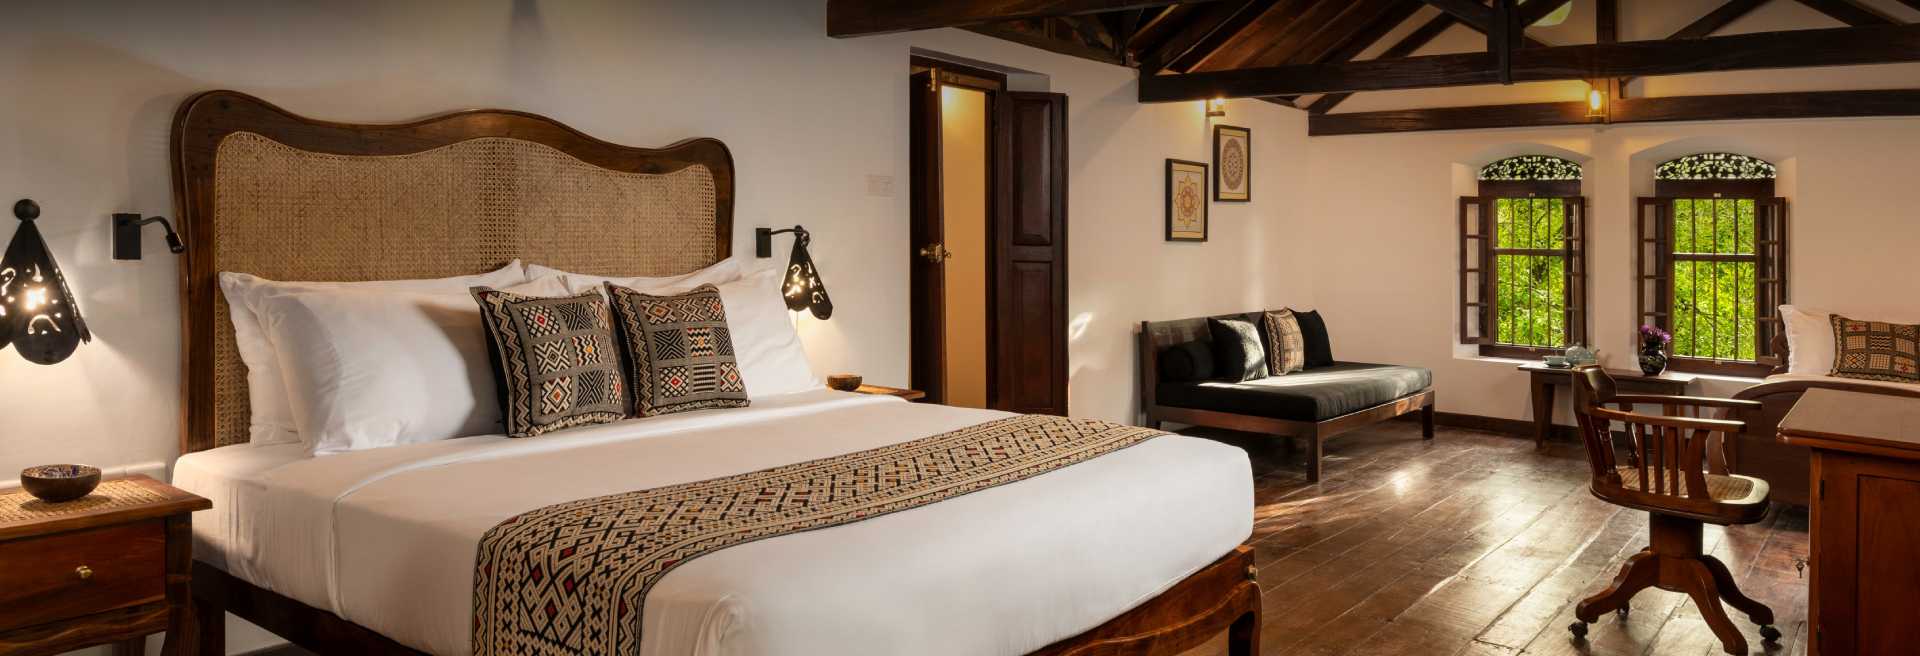 Jetwing-Galle-Heritage-accommodation Attic Suite 